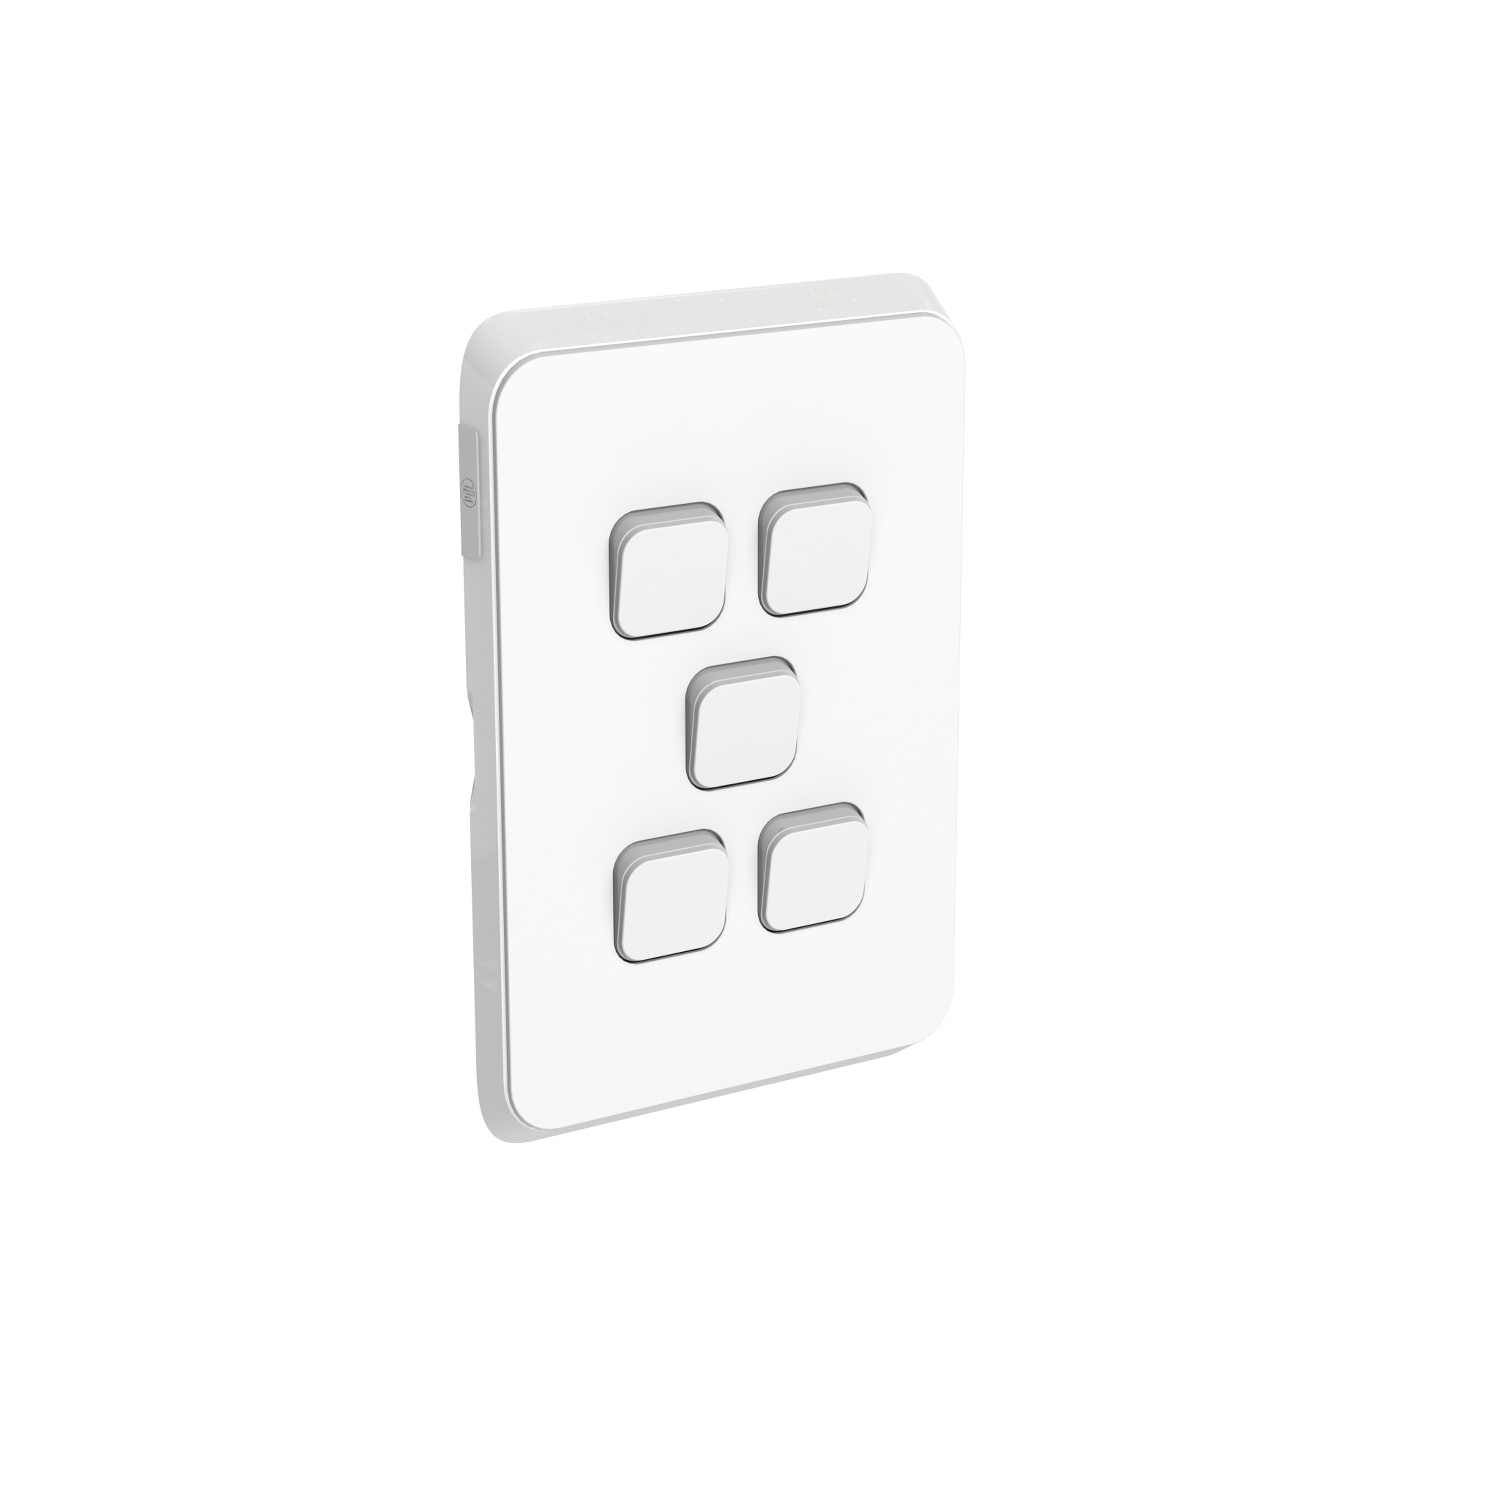 PDL385C-VW - PDL Iconic Cover Plate Switch 5Gang - Vivid White